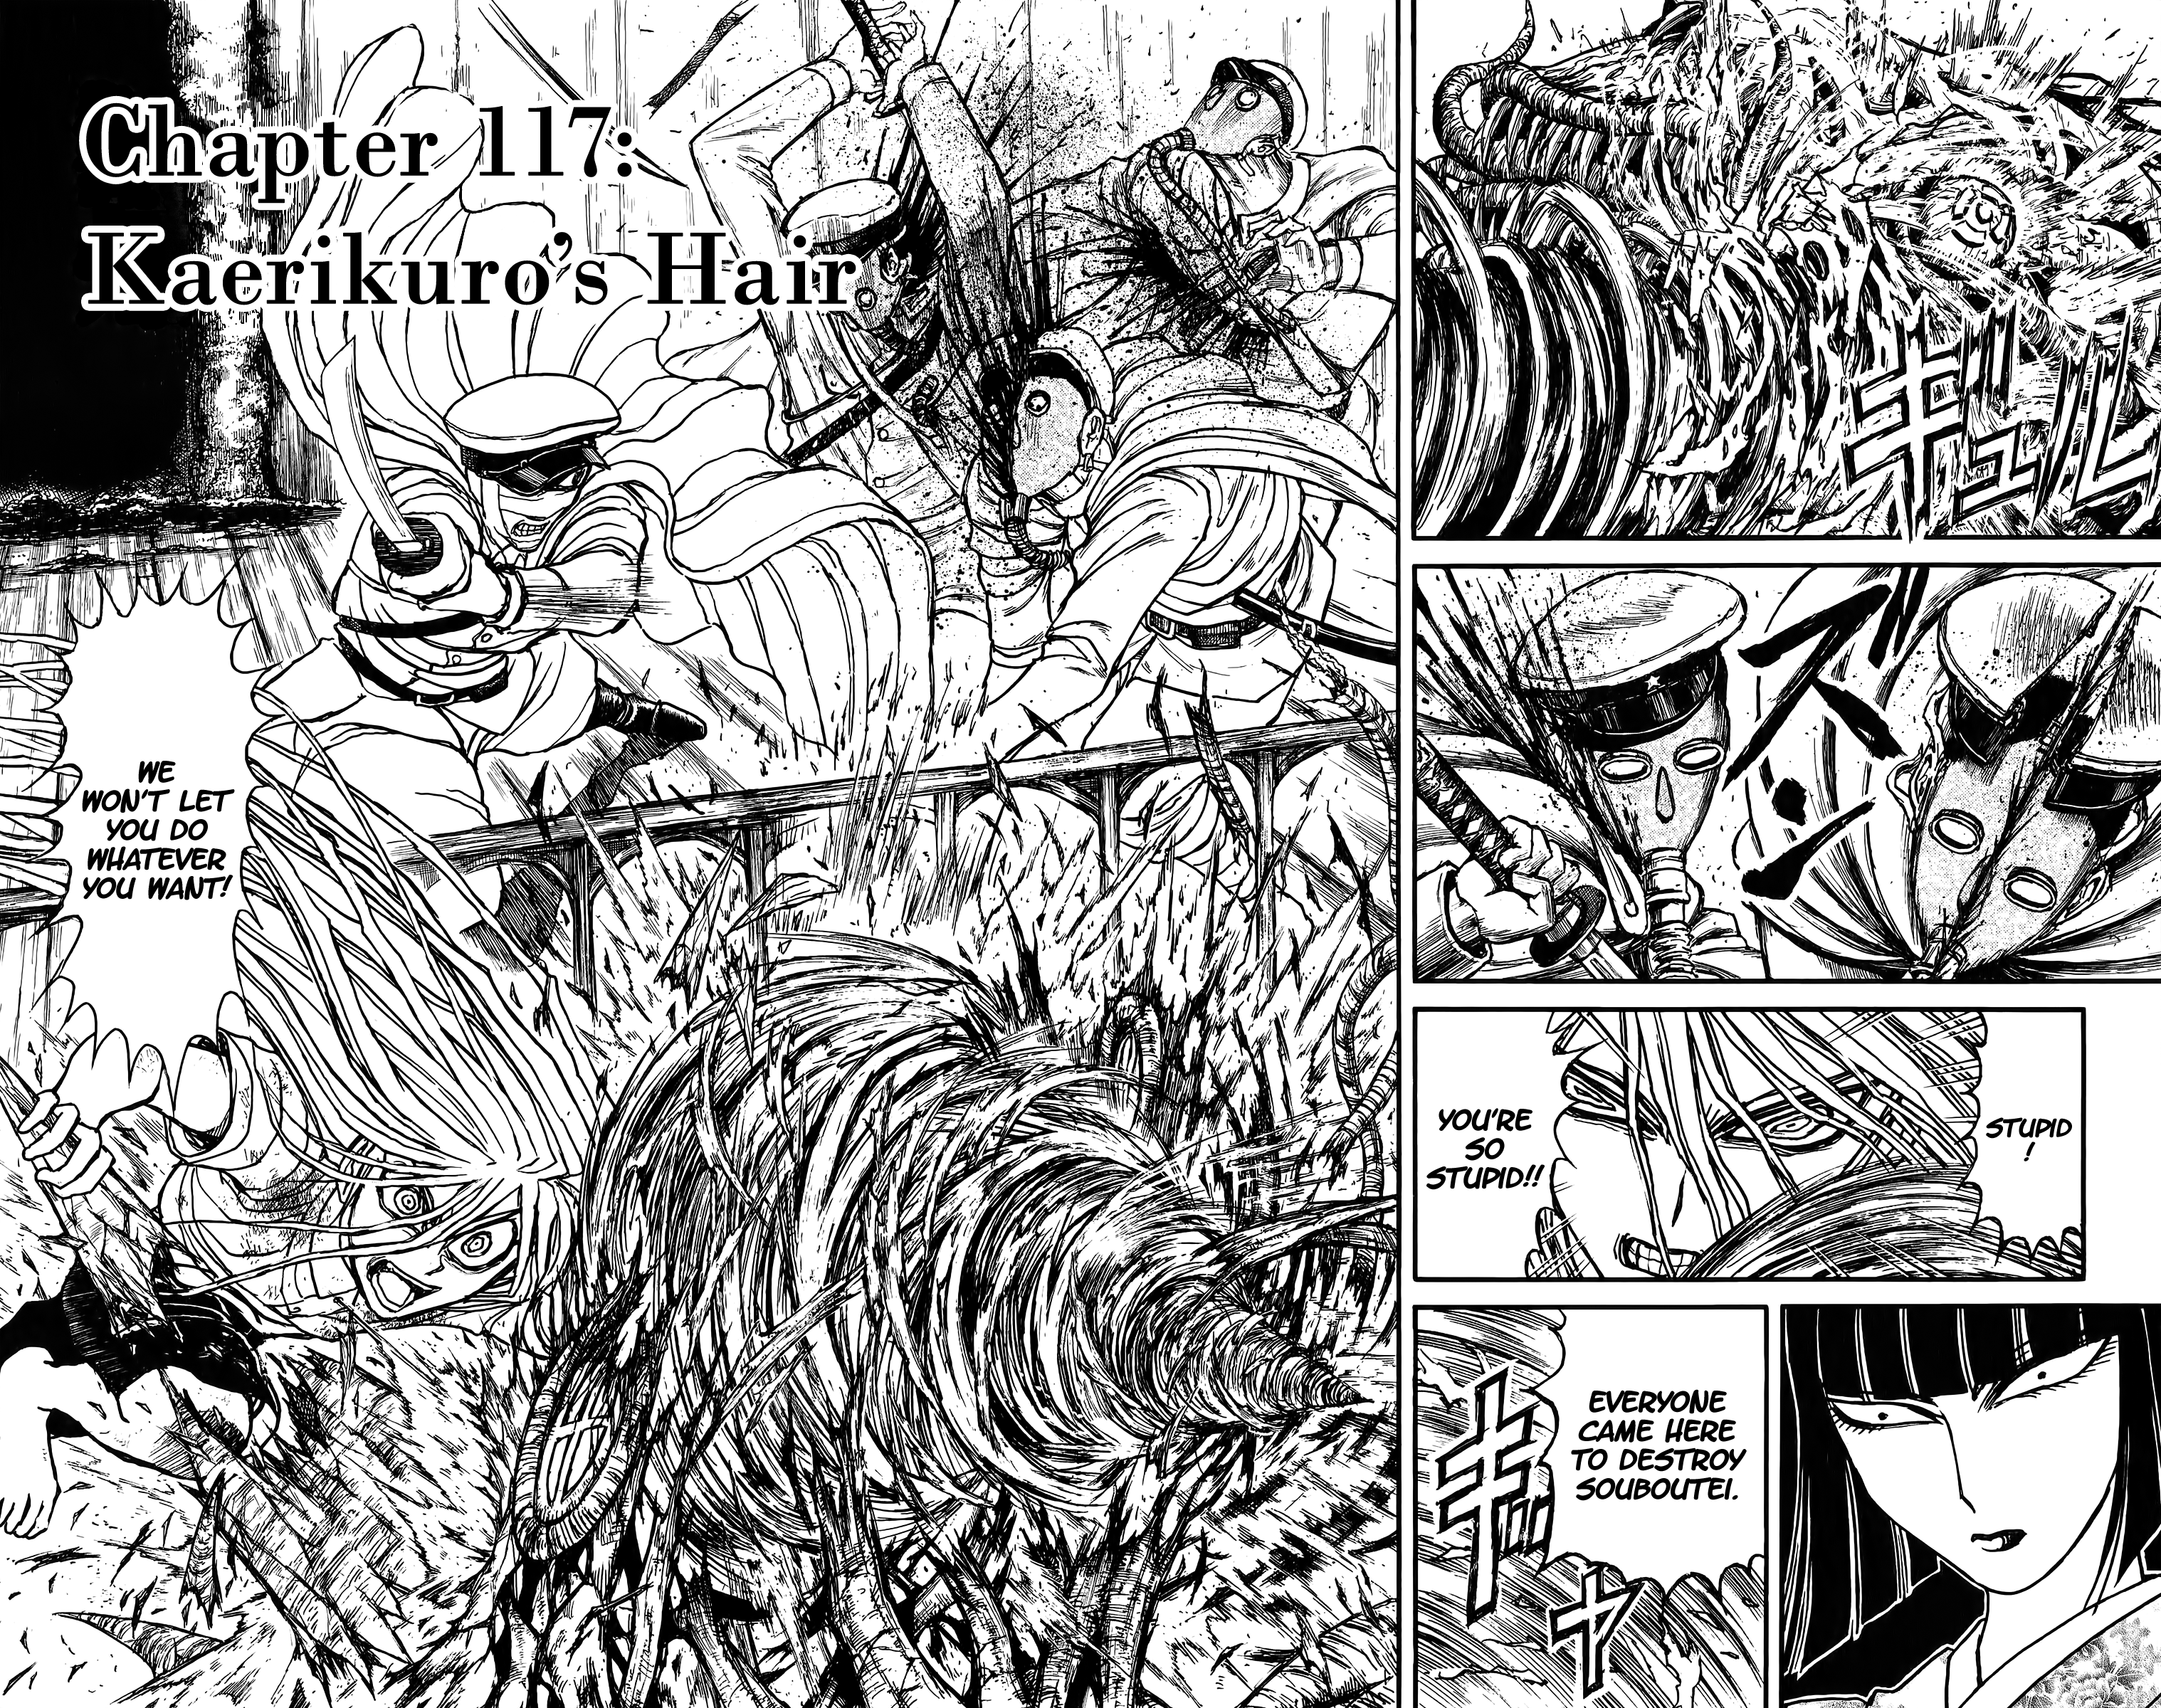 Souboutei Must Be Destroyed Vol.12 Chapter 117: Kaerikuro's Hair - Picture 3